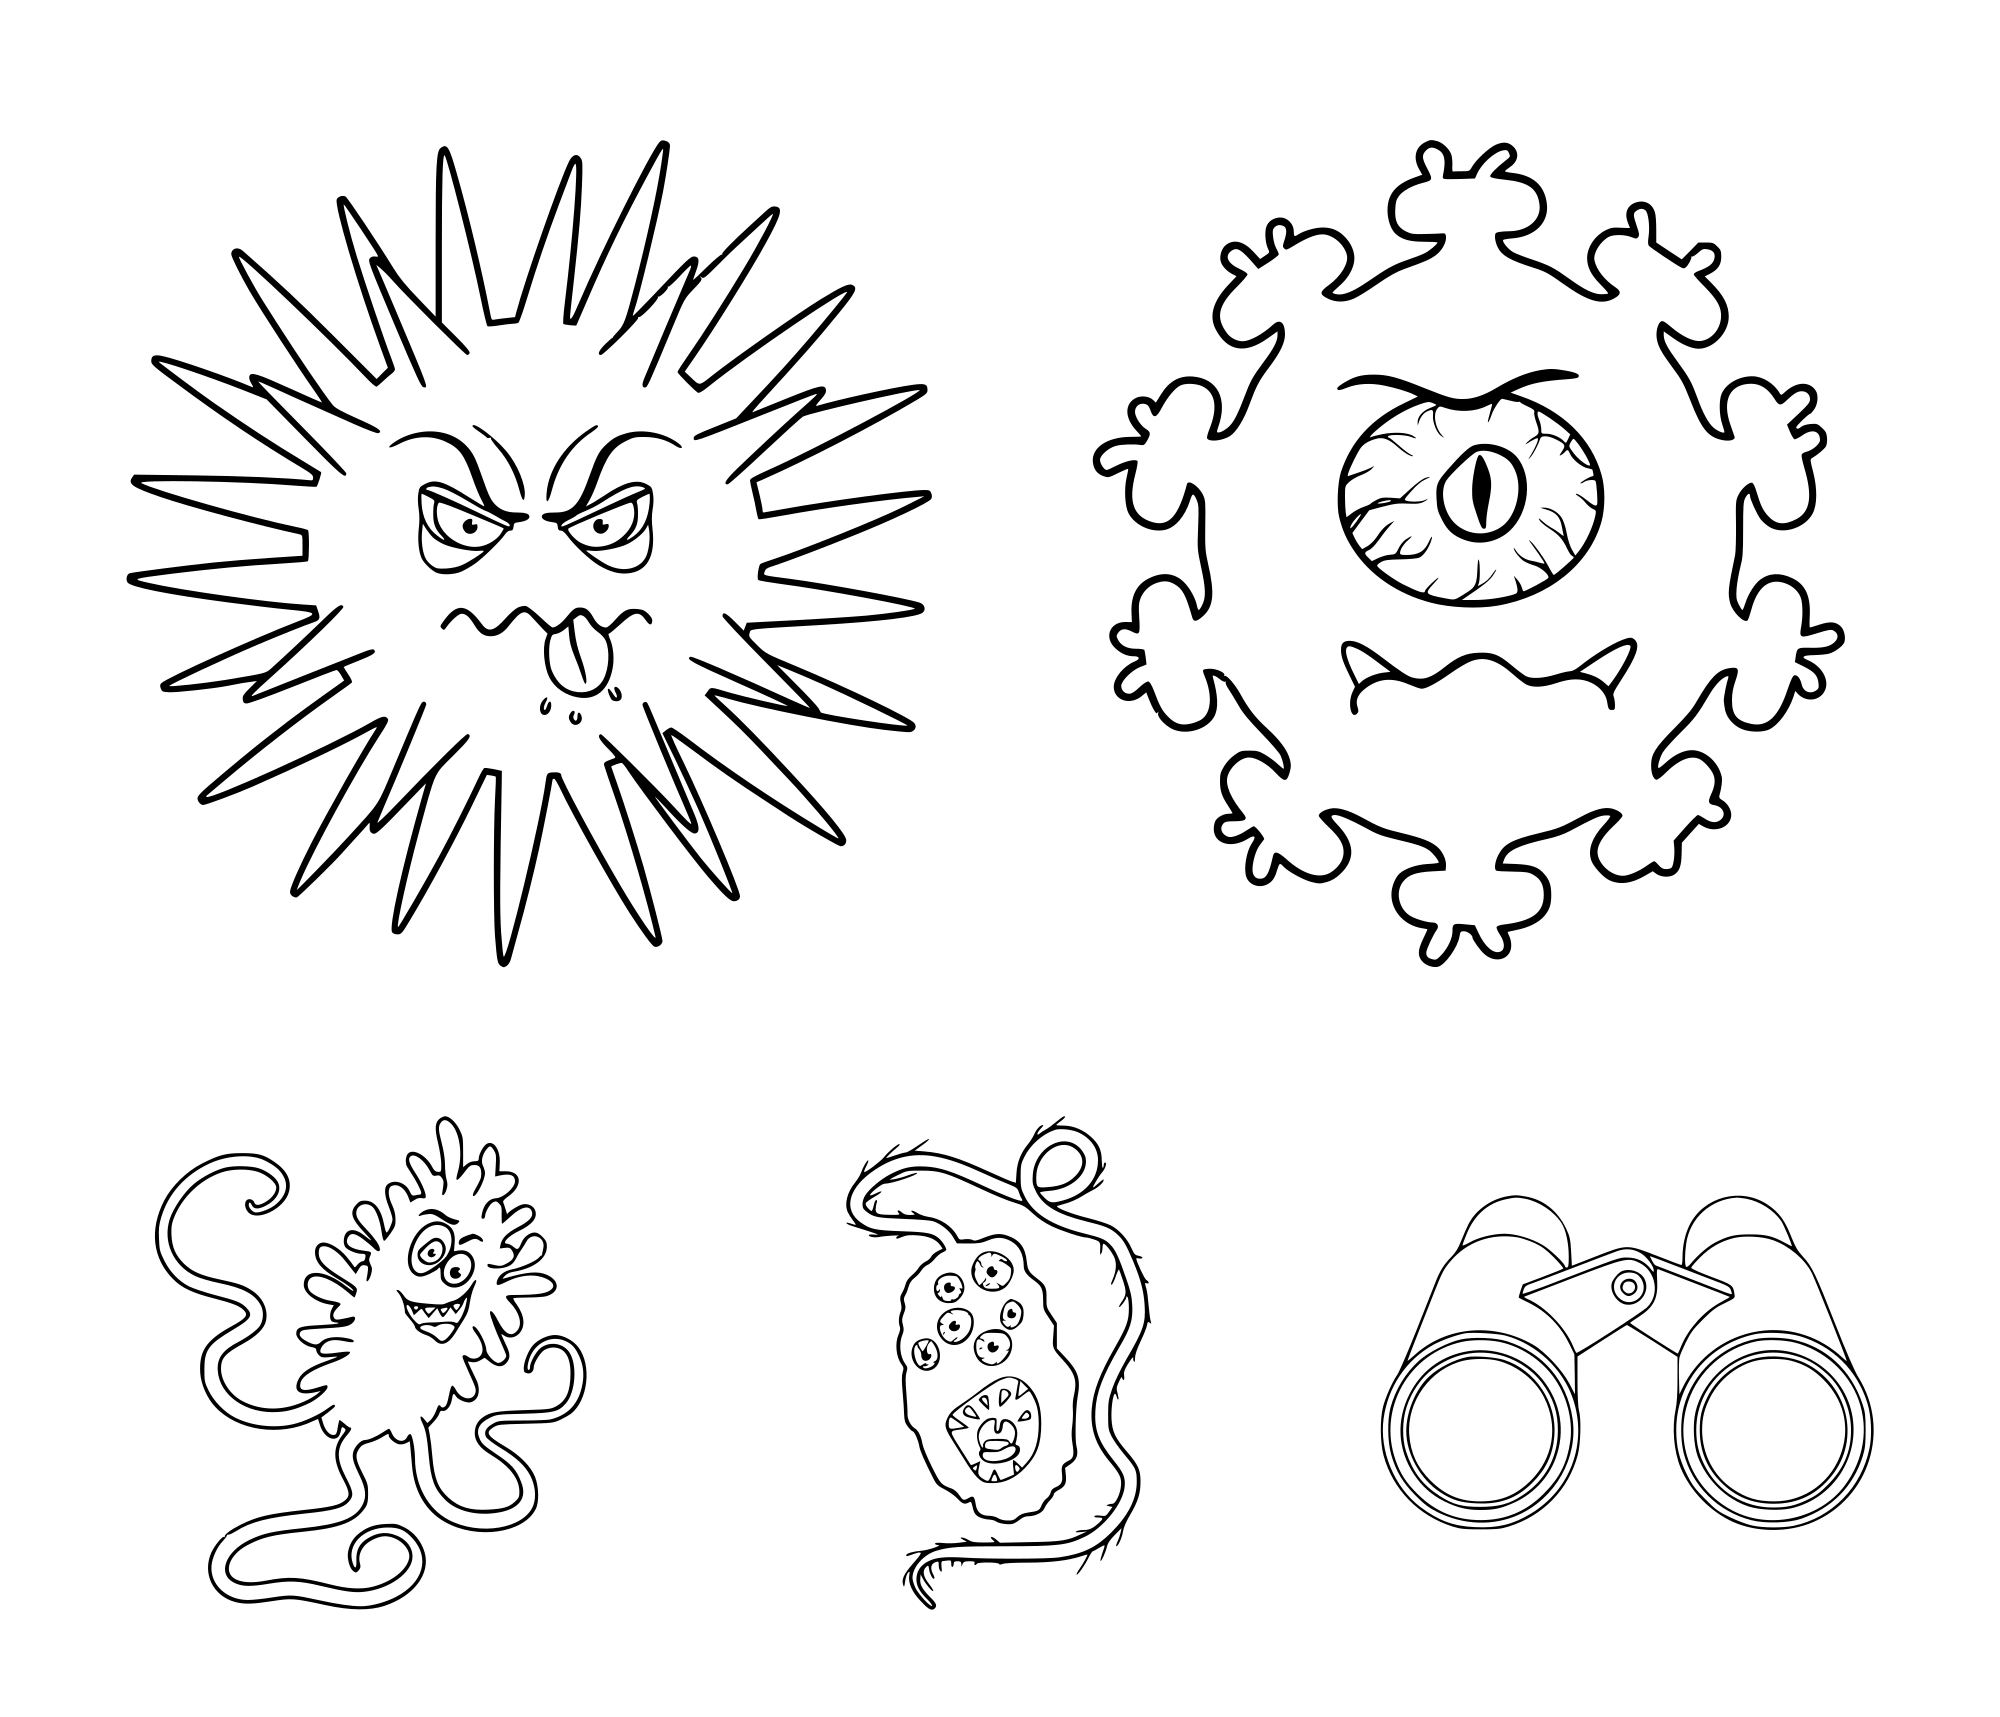 Different Types Of Microbes And Virus Covid 19 Coloring Page